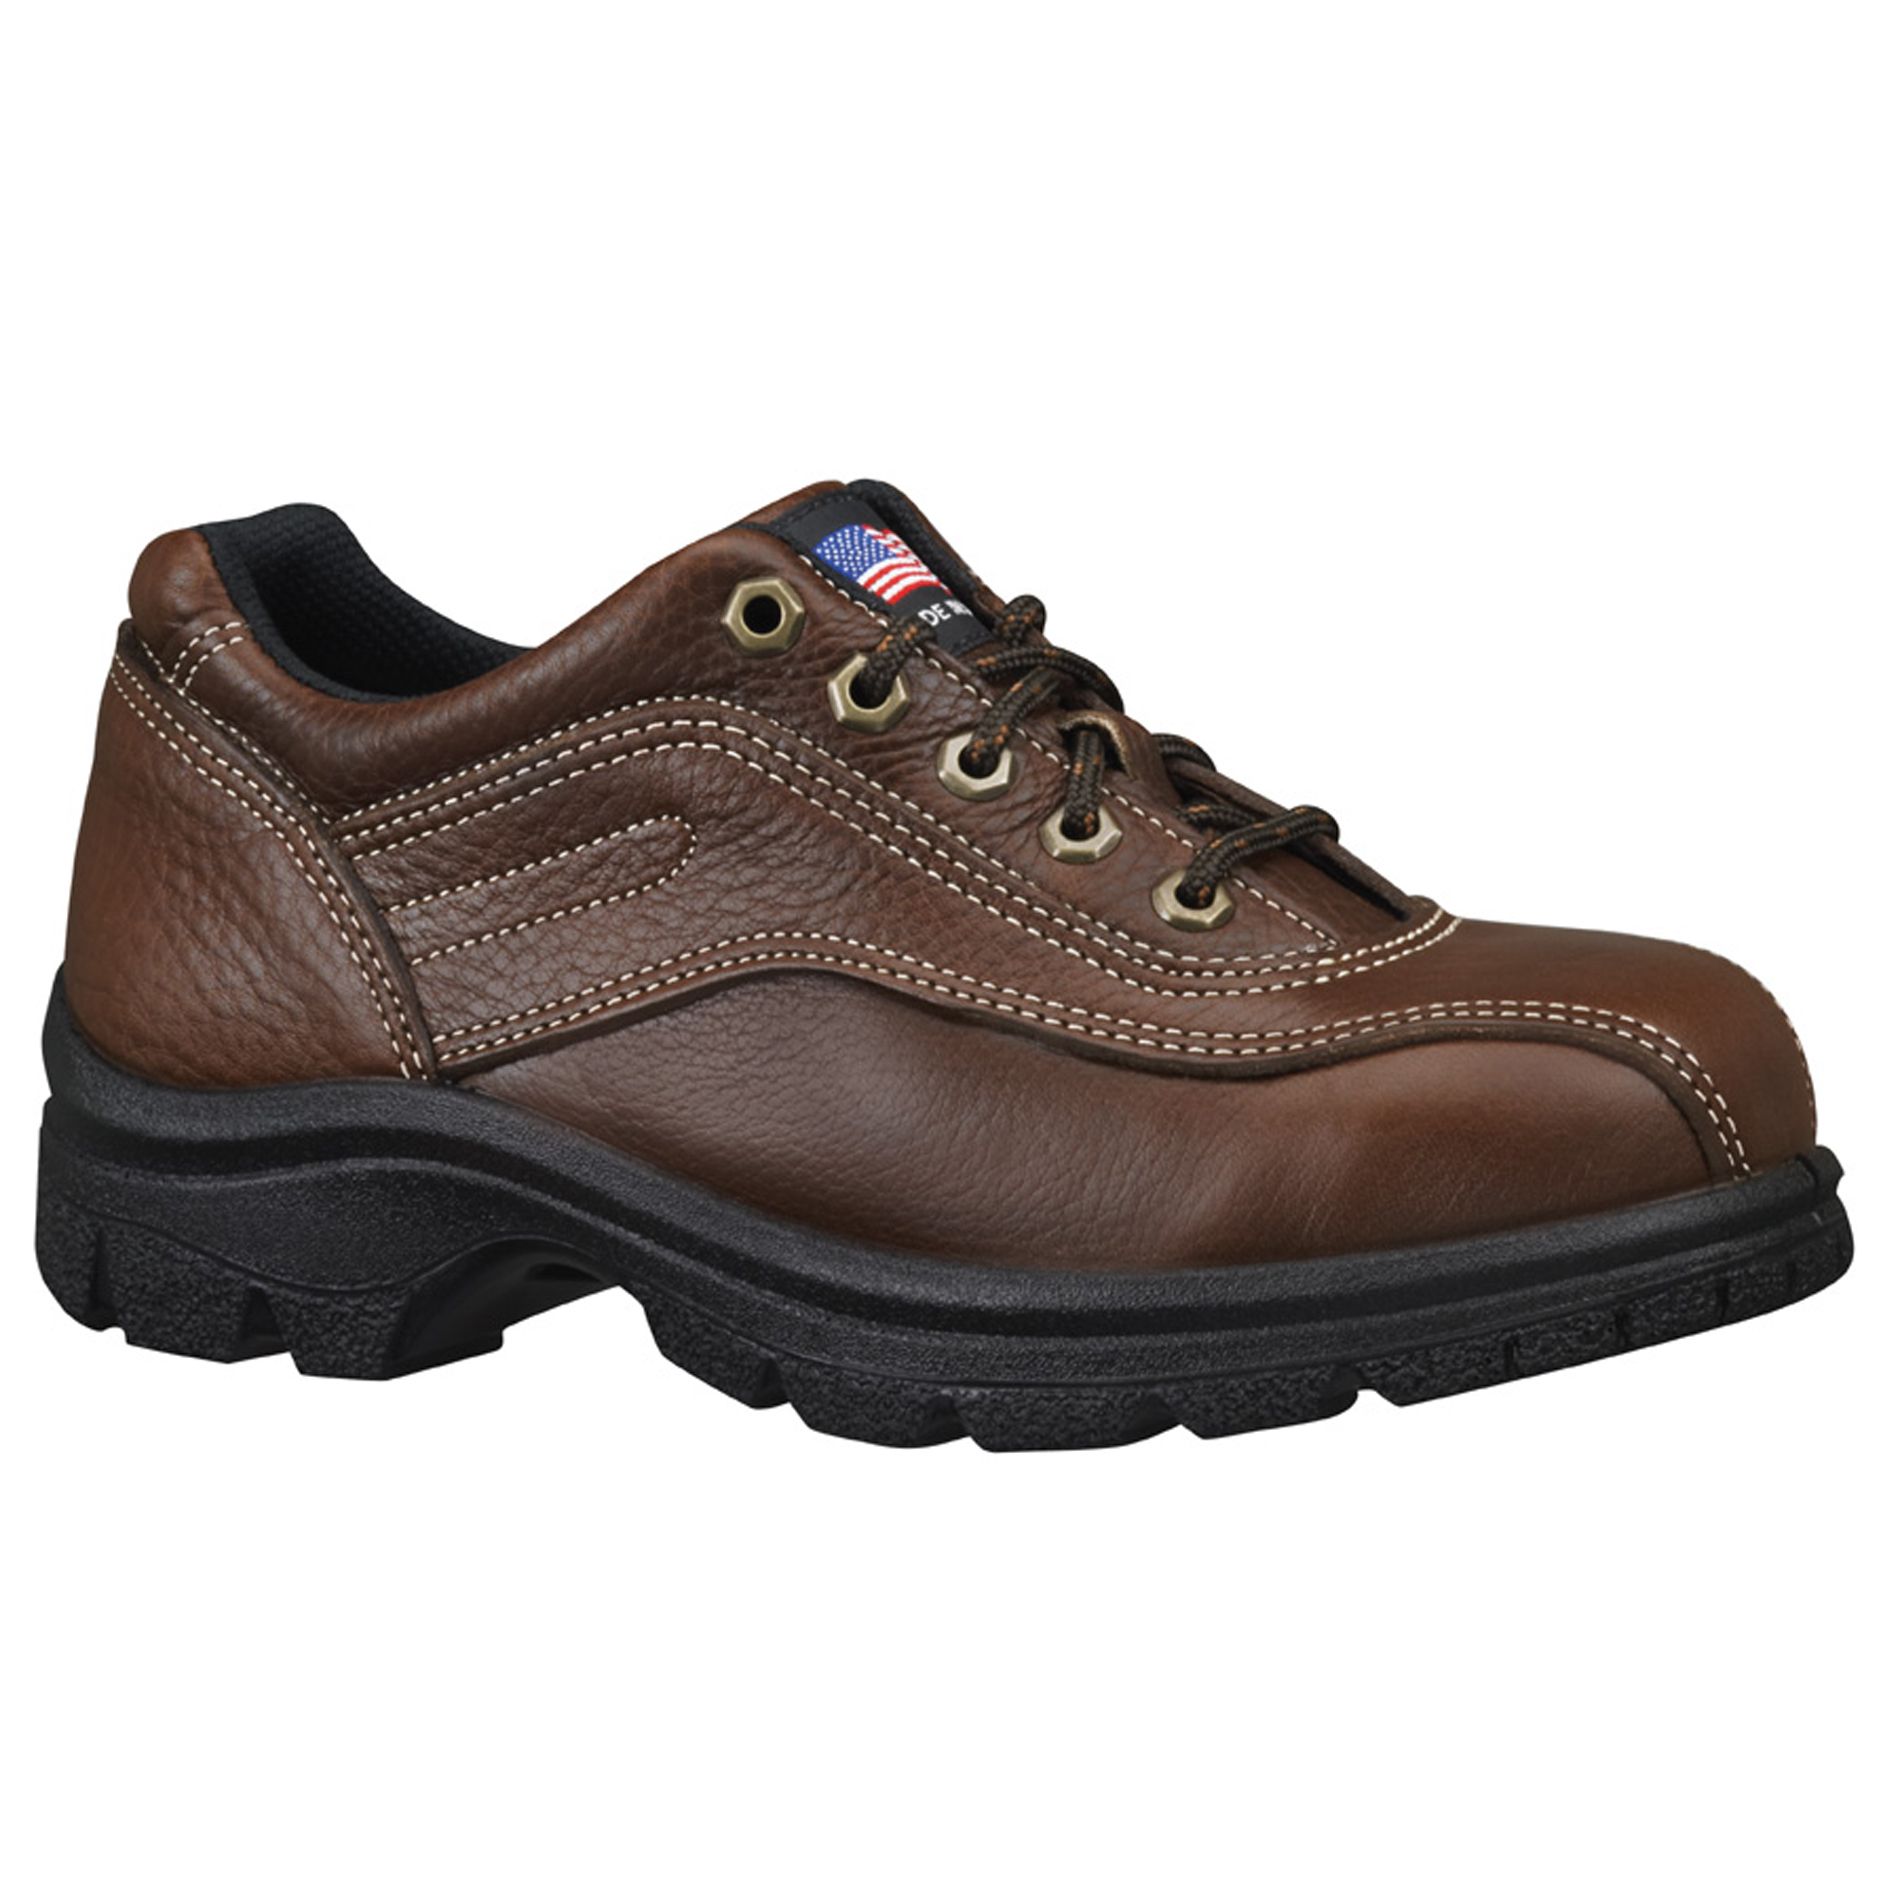 Women's American Heritage 504-4406 Brown Steel Toe Work Shoes - Wide Width Available